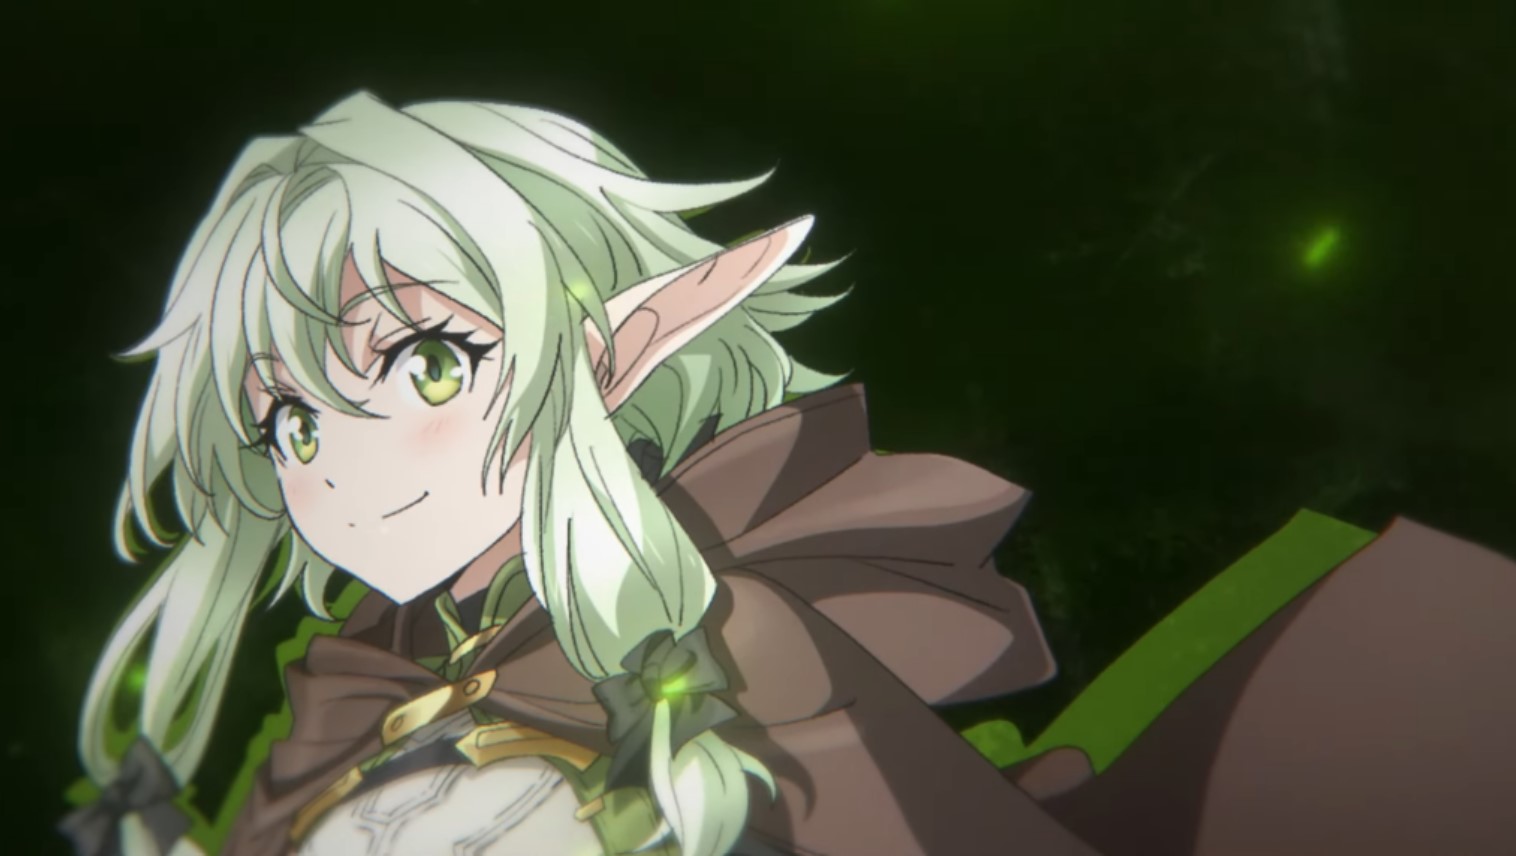 Goblin Slayer Season 2 Episode 8: Spoiler from the Light Novel, release  date, where to watch, and more